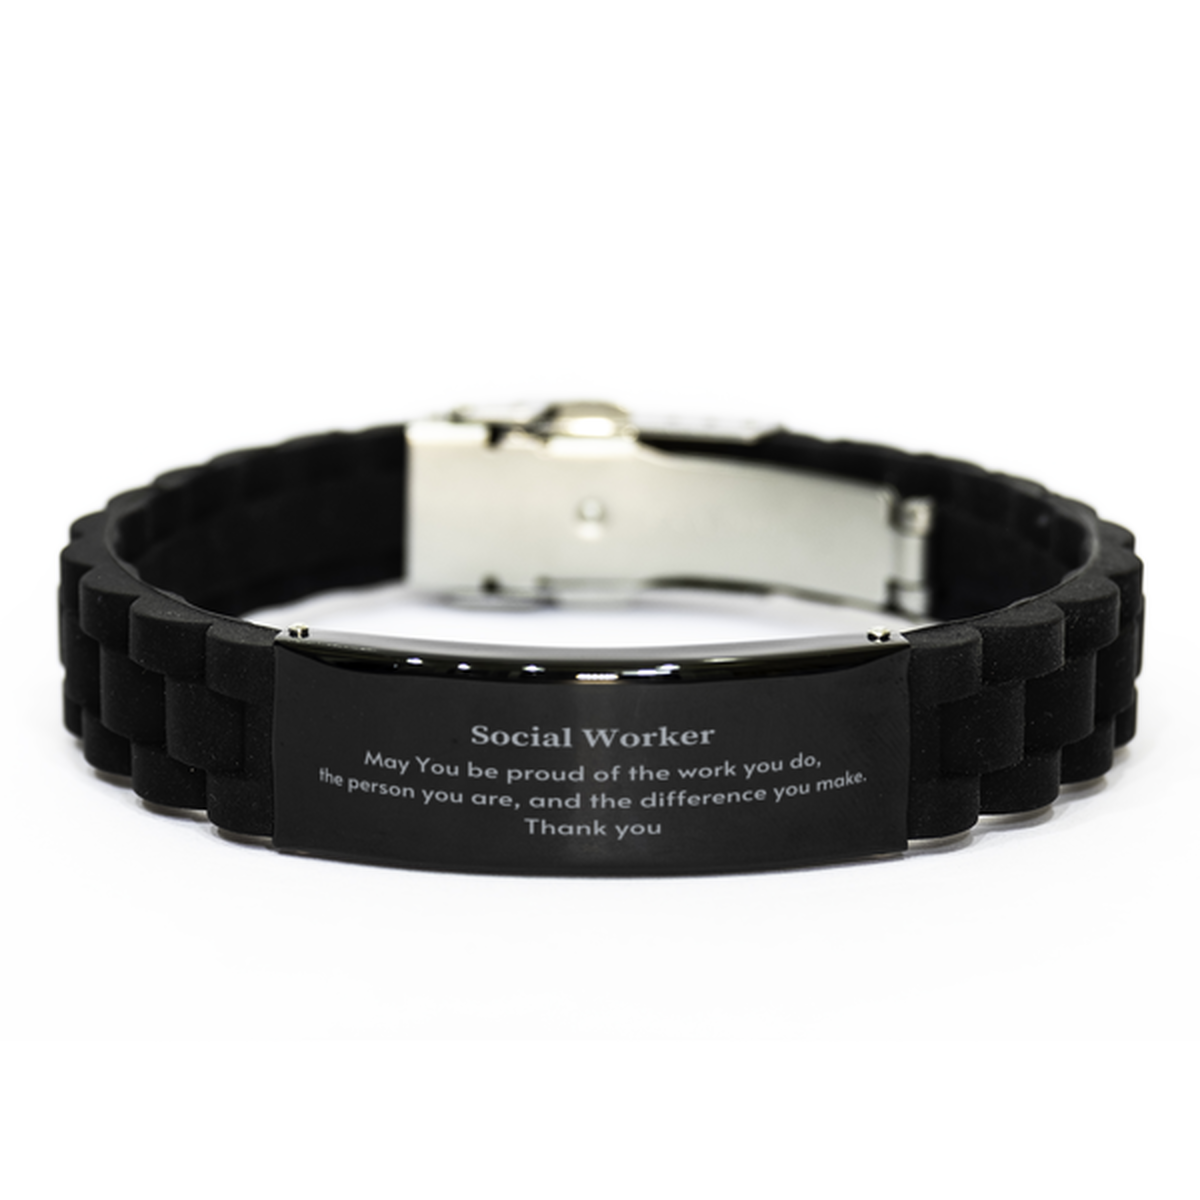 Heartwarming Black Glidelock Clasp Bracelet Retirement Coworkers Gifts for Social Worker, Social Worker May You be proud of the work you do, the person you are Gifts for Boss Men Women Friends